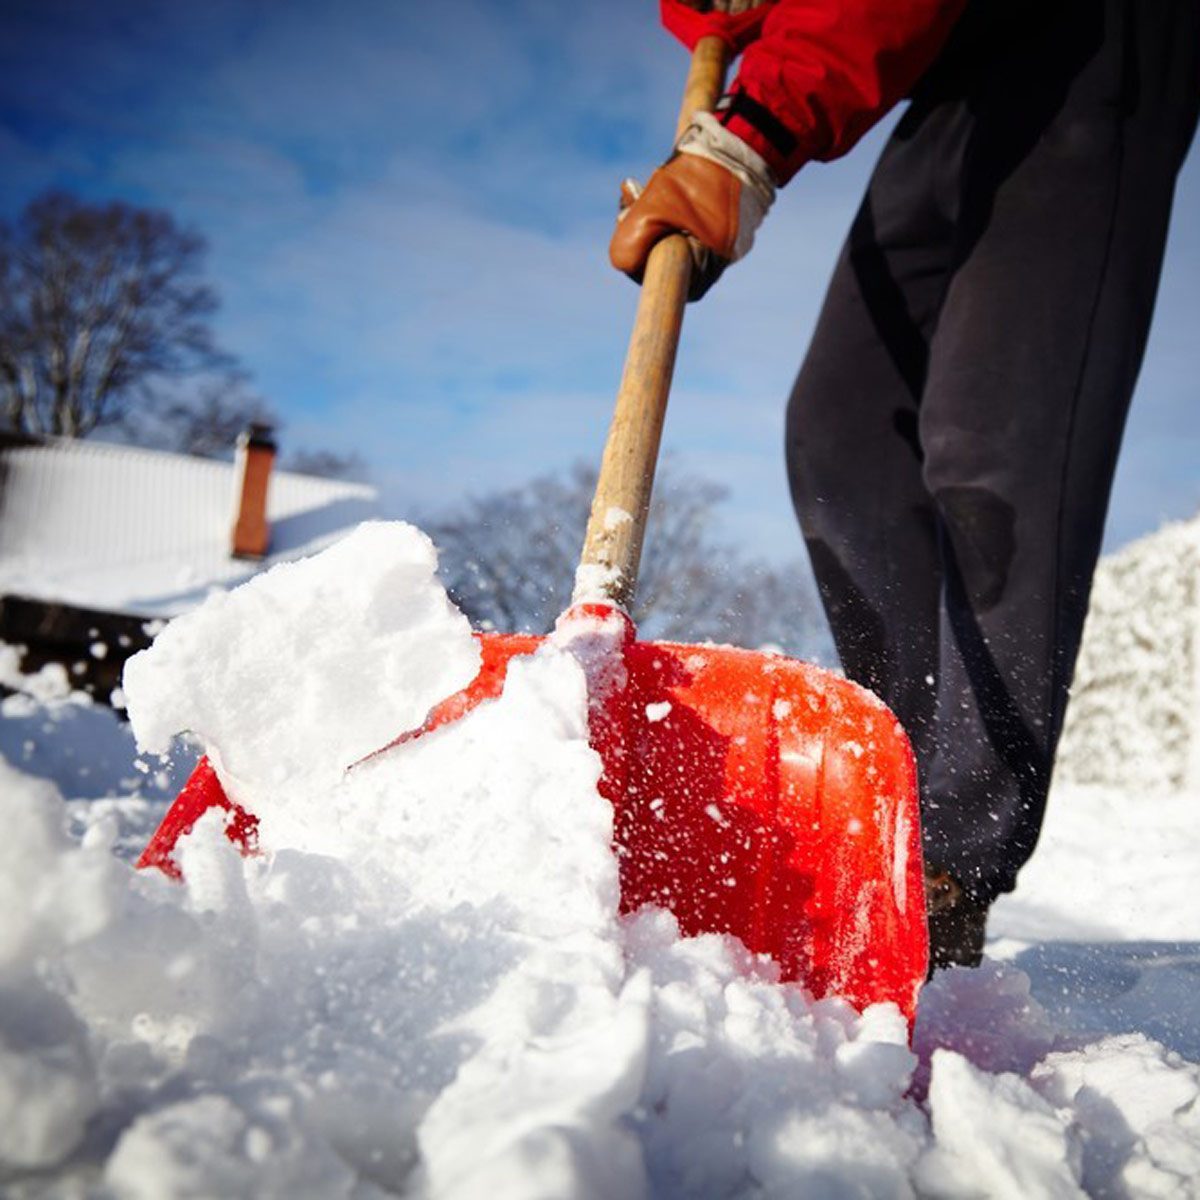 Forget Snow Blowers. Buy Heated Snow Melting Mats.